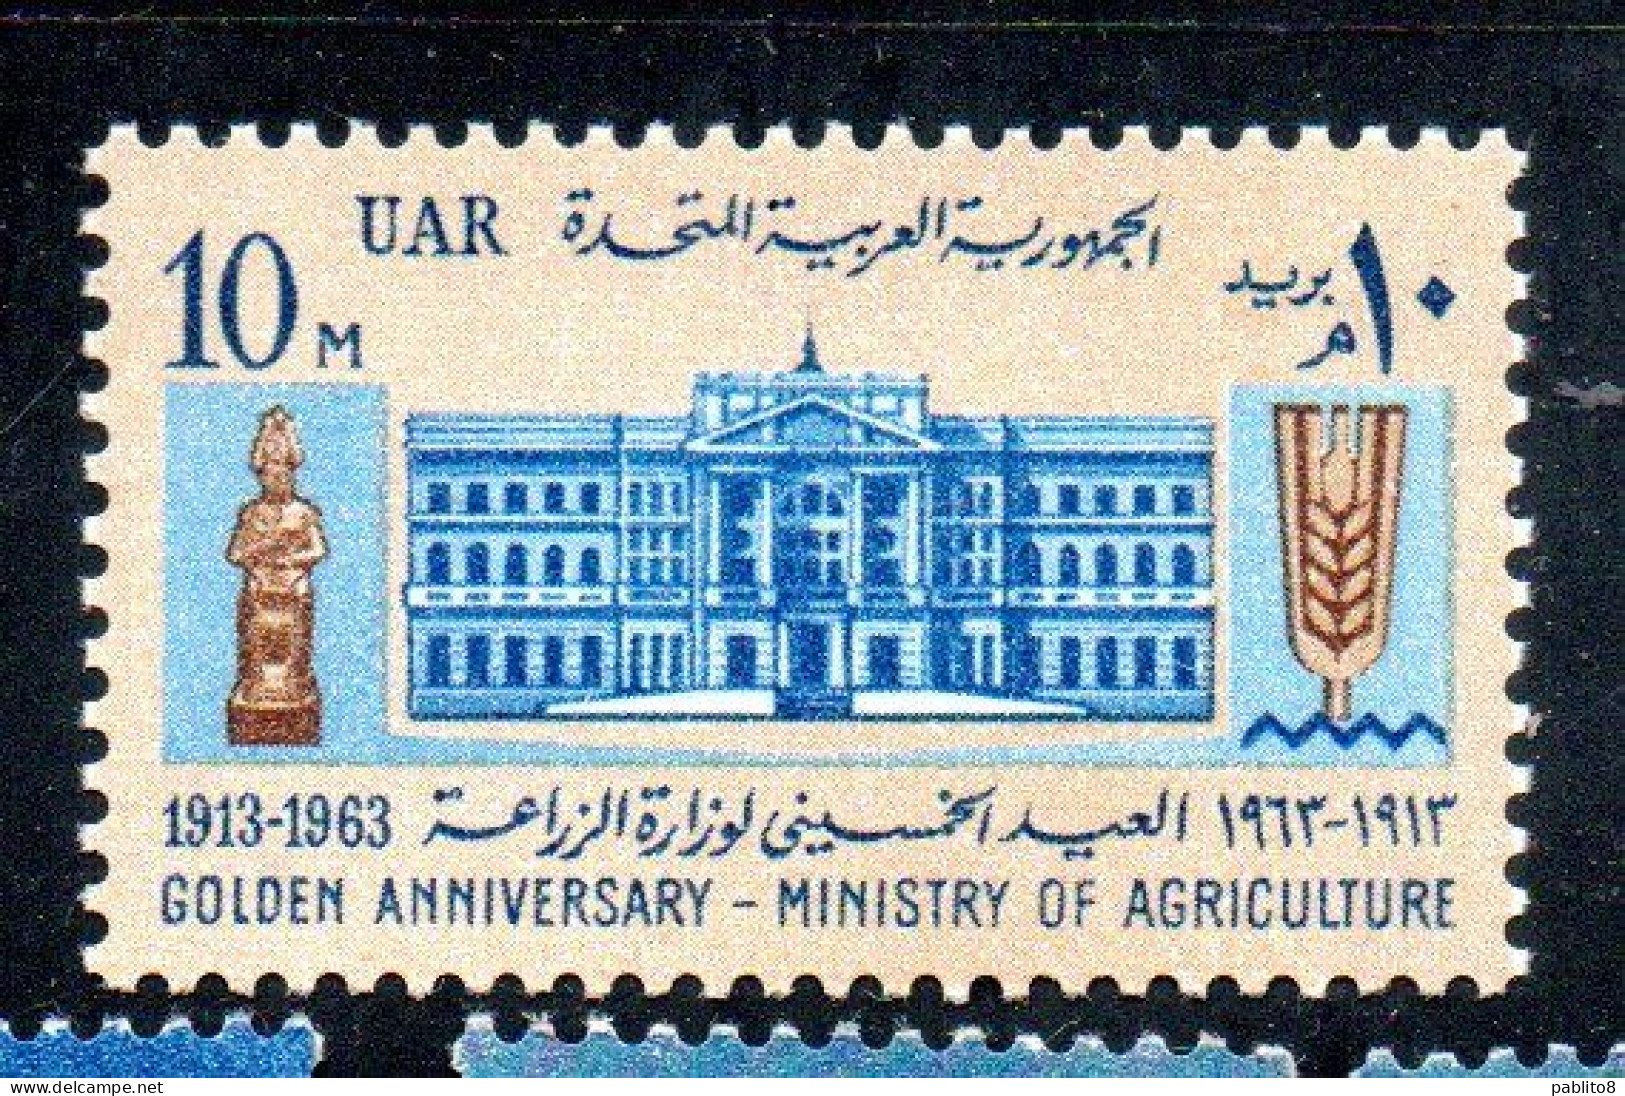 UAR EGYPT EGITTO 1963 50th ANNIVERSARY OF MINISTRY OF AGRICULTURAL 10m MNH - Nuovi